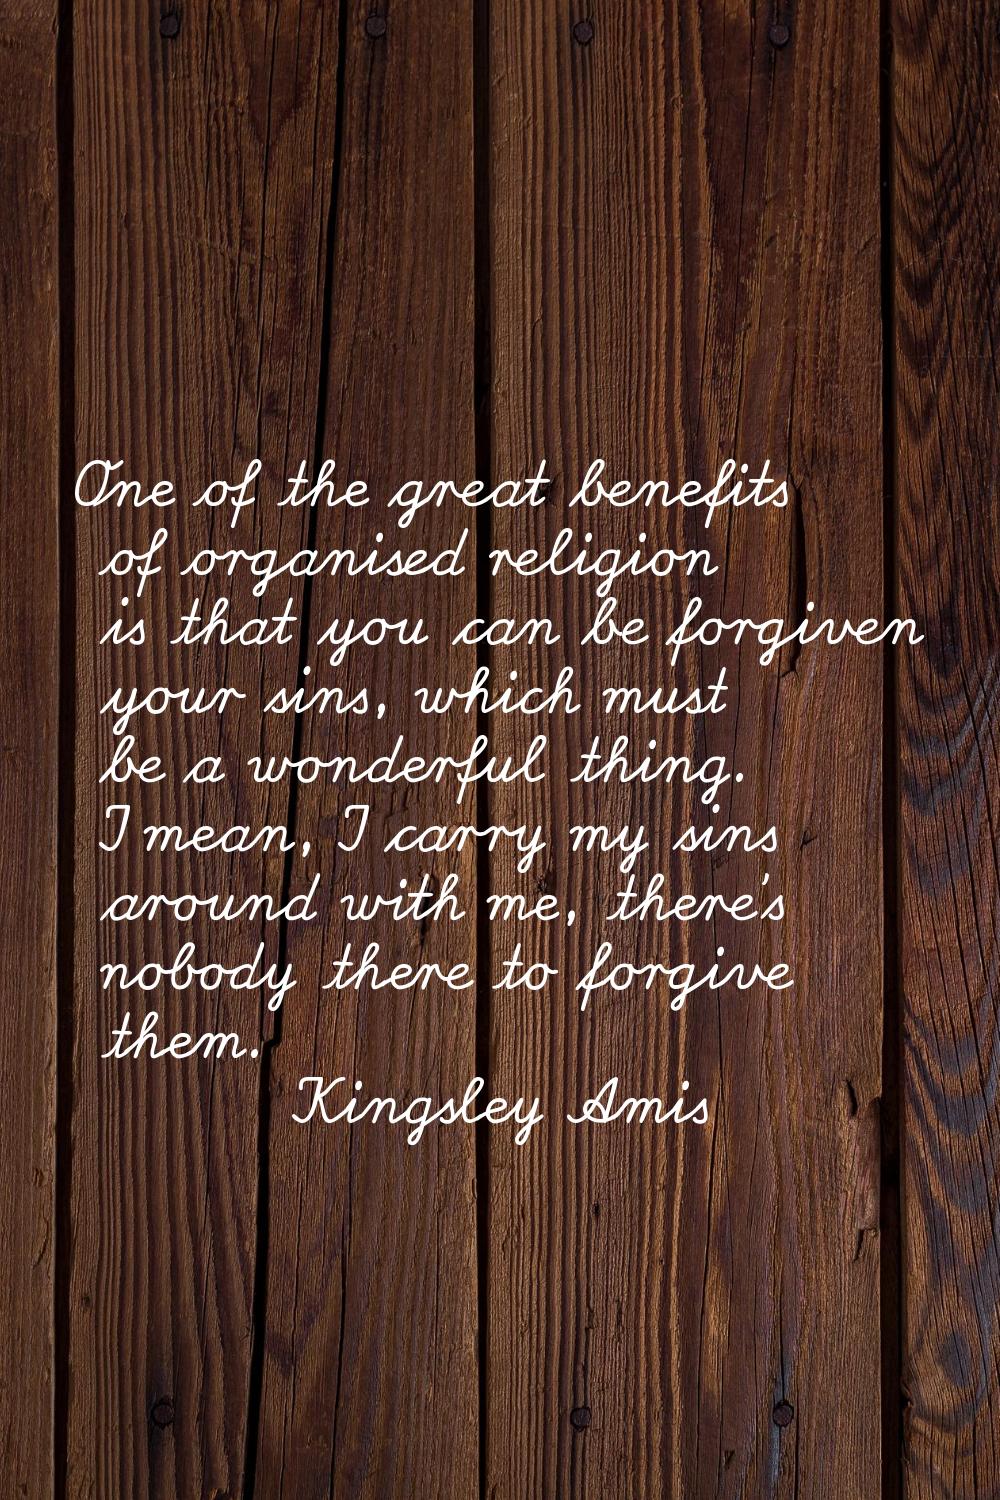 One of the great benefits of organised religion is that you can be forgiven your sins, which must b